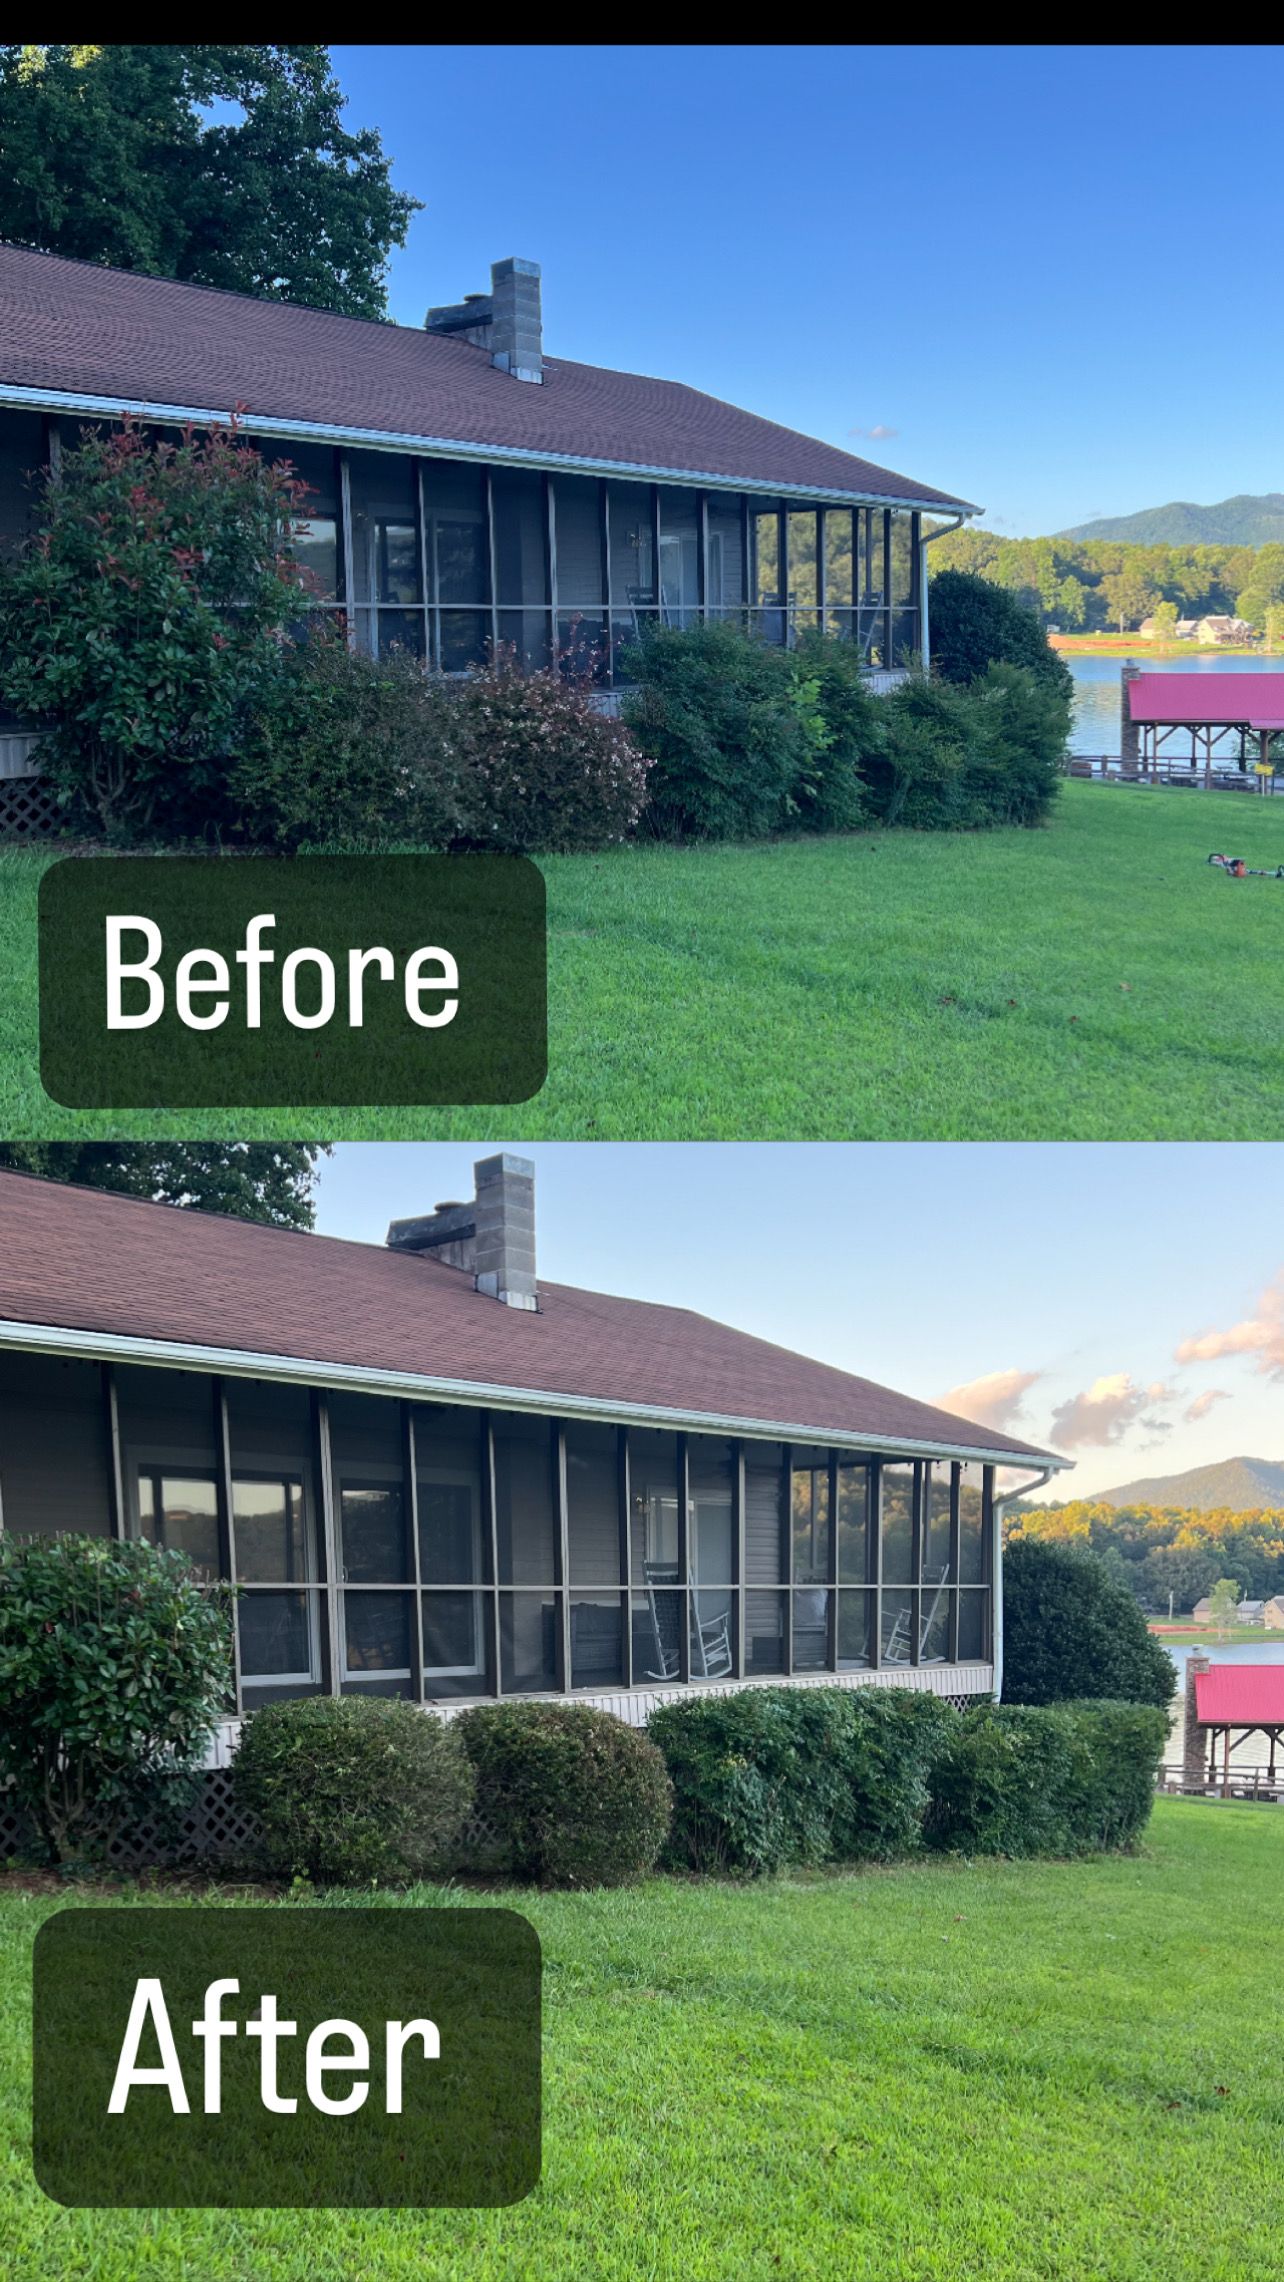 Work for Chatuge Outdoor Services in Hayesville, NC